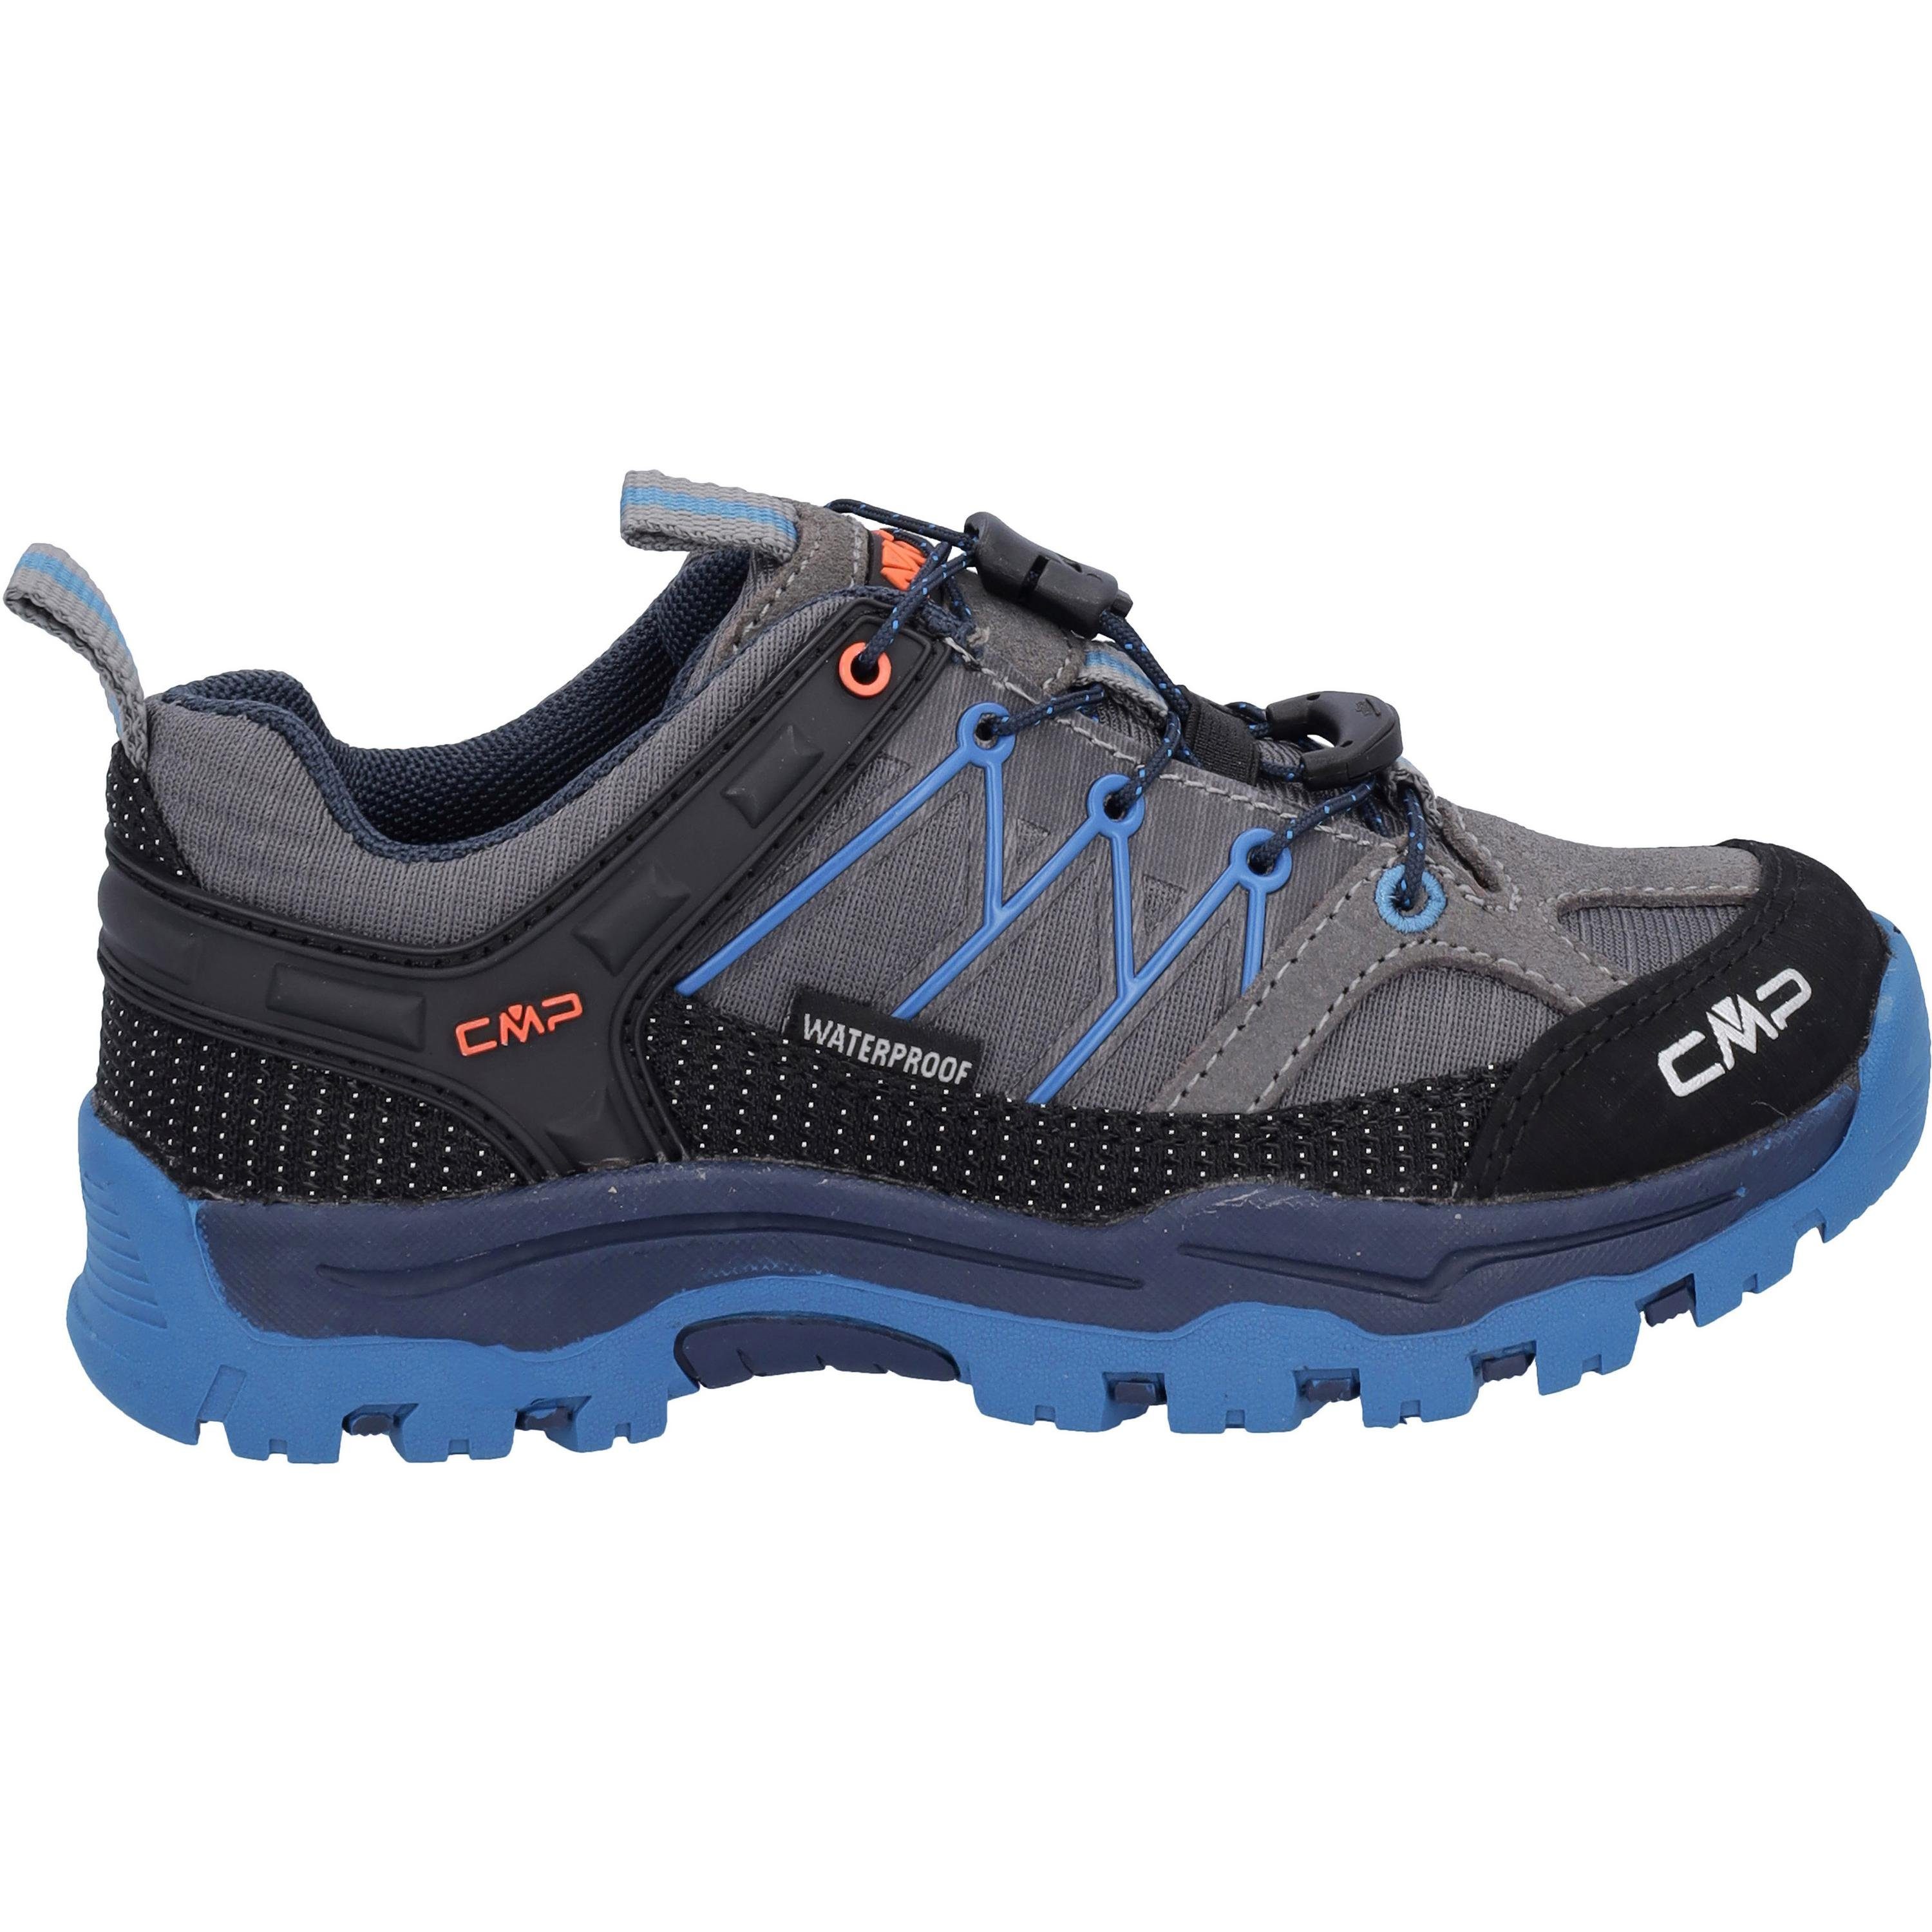 CMP WP Low Outdoorschuh Rigel graffite-oltremare